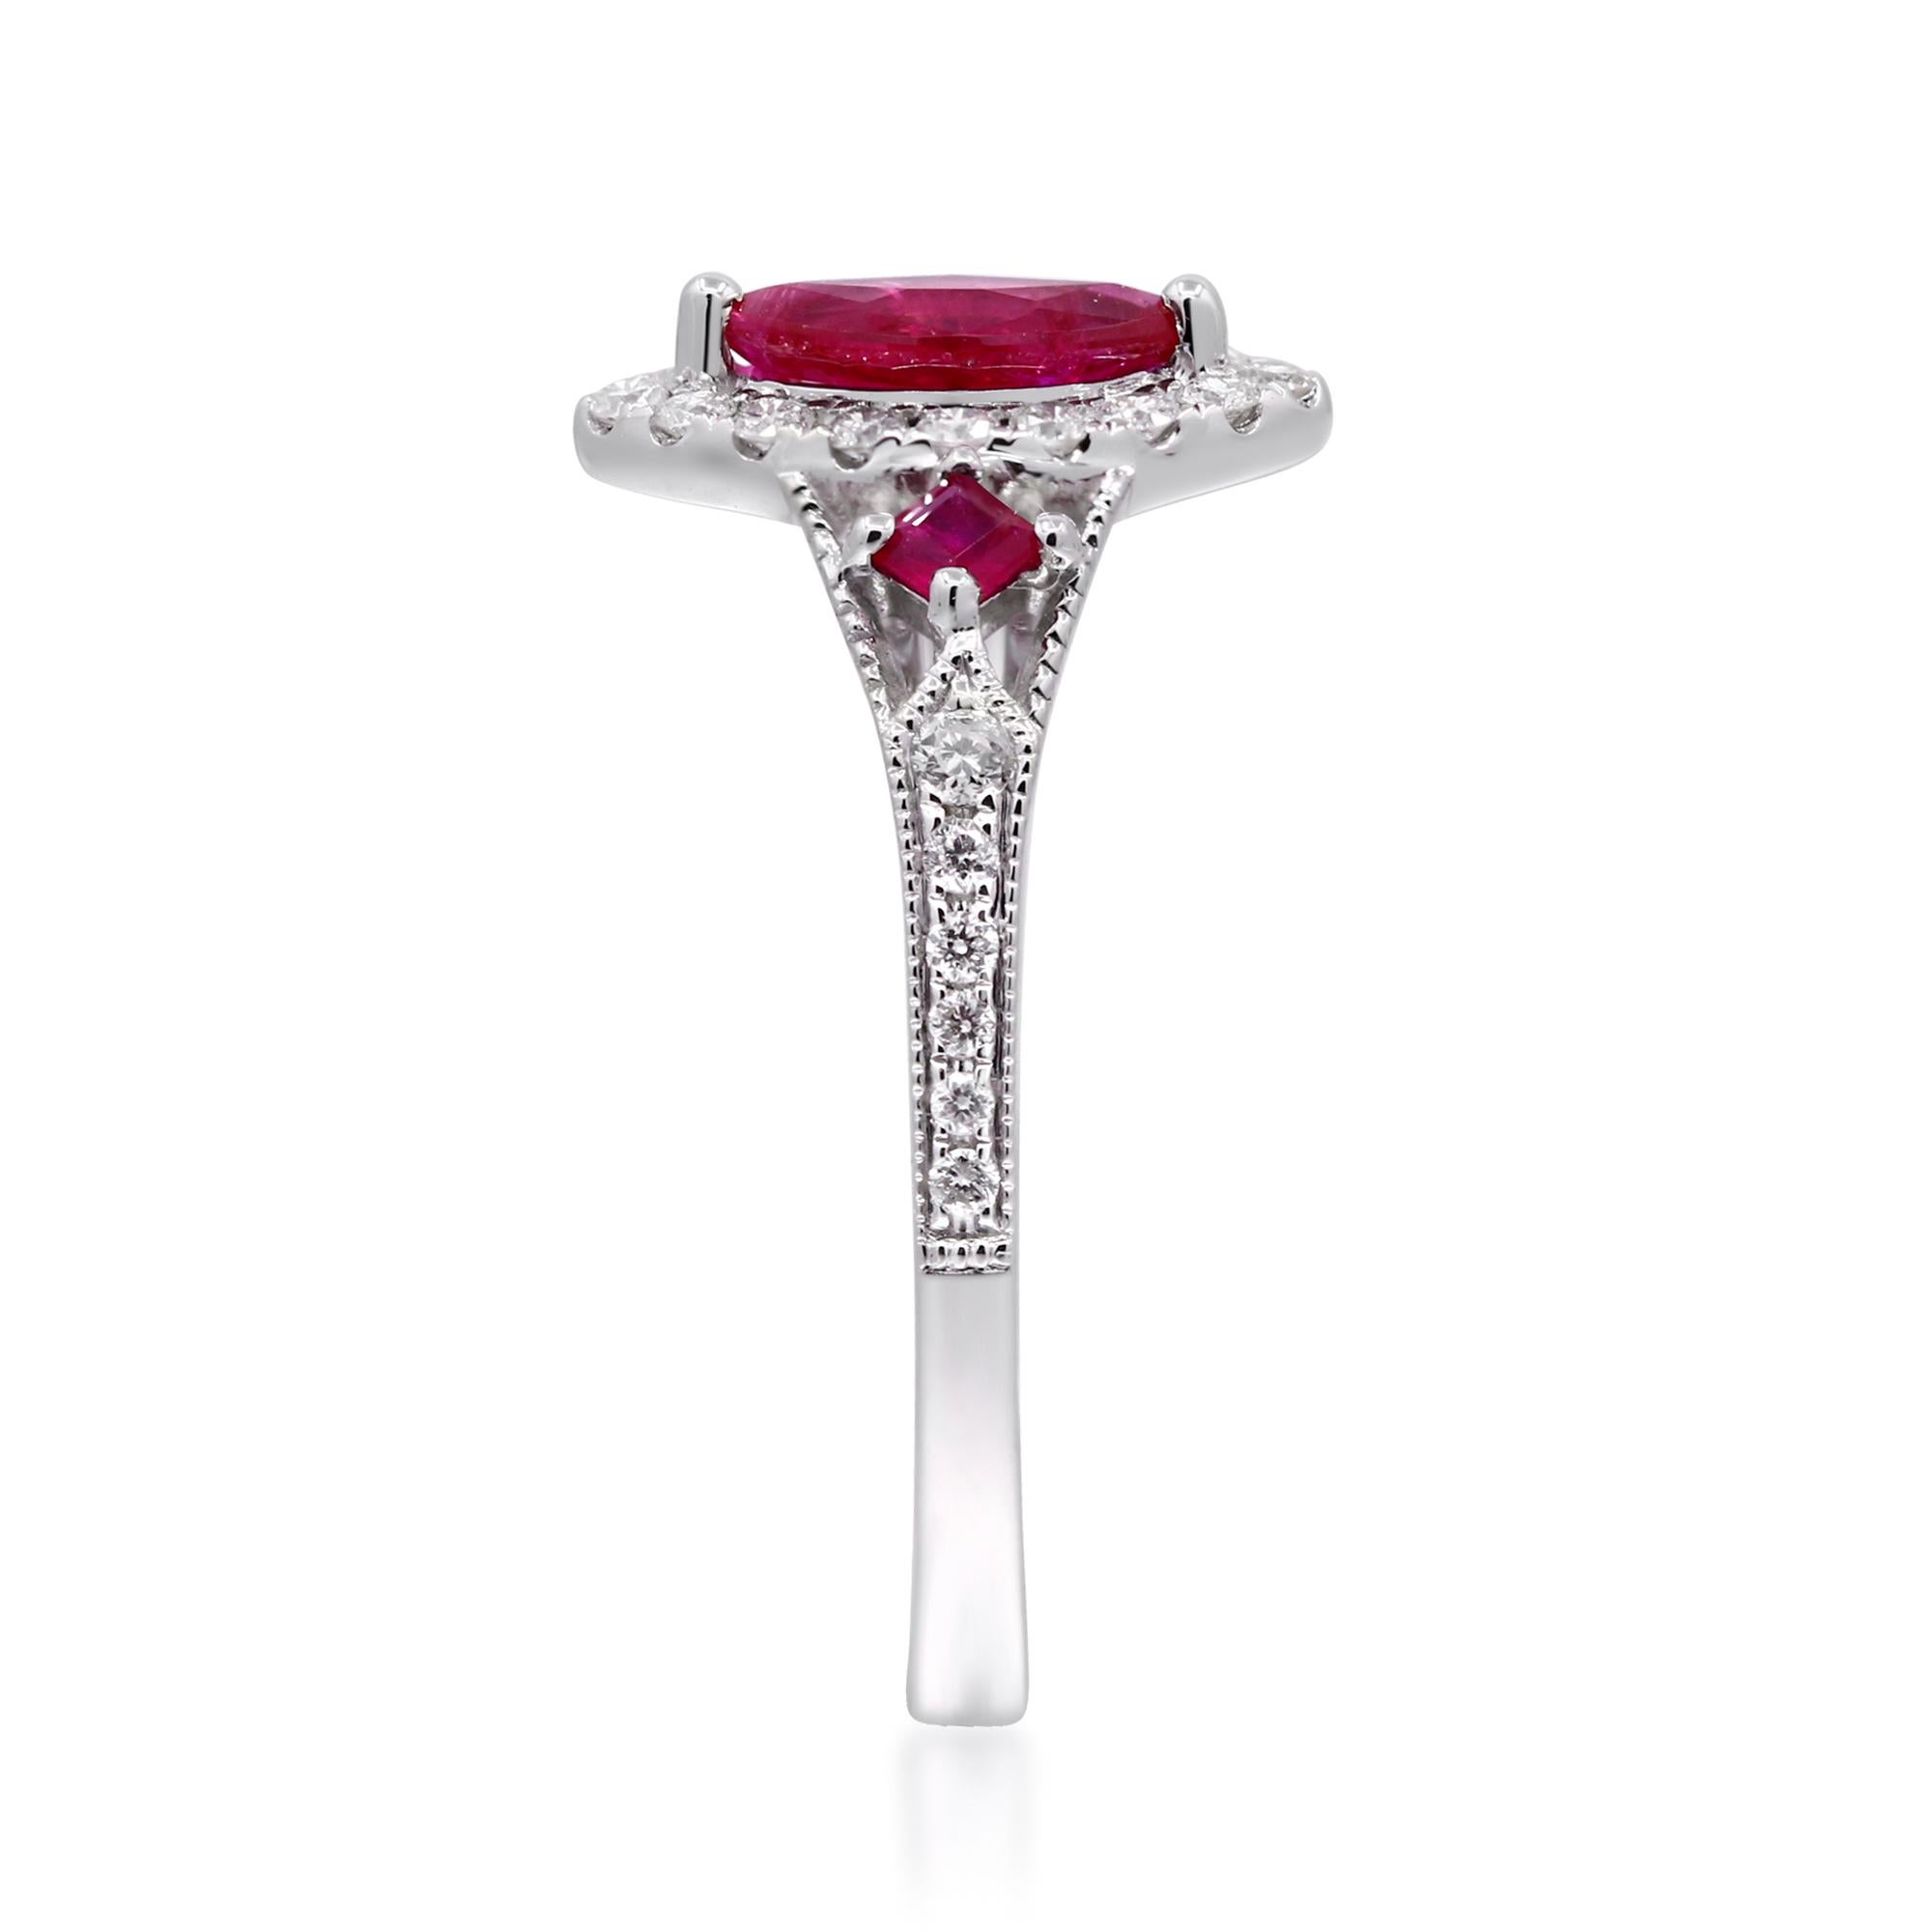 Decorate yourself in elegance with this Ring is crafted from 14-karat White Gold by Gin & Grace.This Ring is made up of 8x4 mm Marquise-Cut Ruby (1 pcs) 0.61 carat, 2.0 mm Square-cut Ruby (2 pcs) 0.12 carat and Round-cut White Diamond (28 Pcs) 0.25